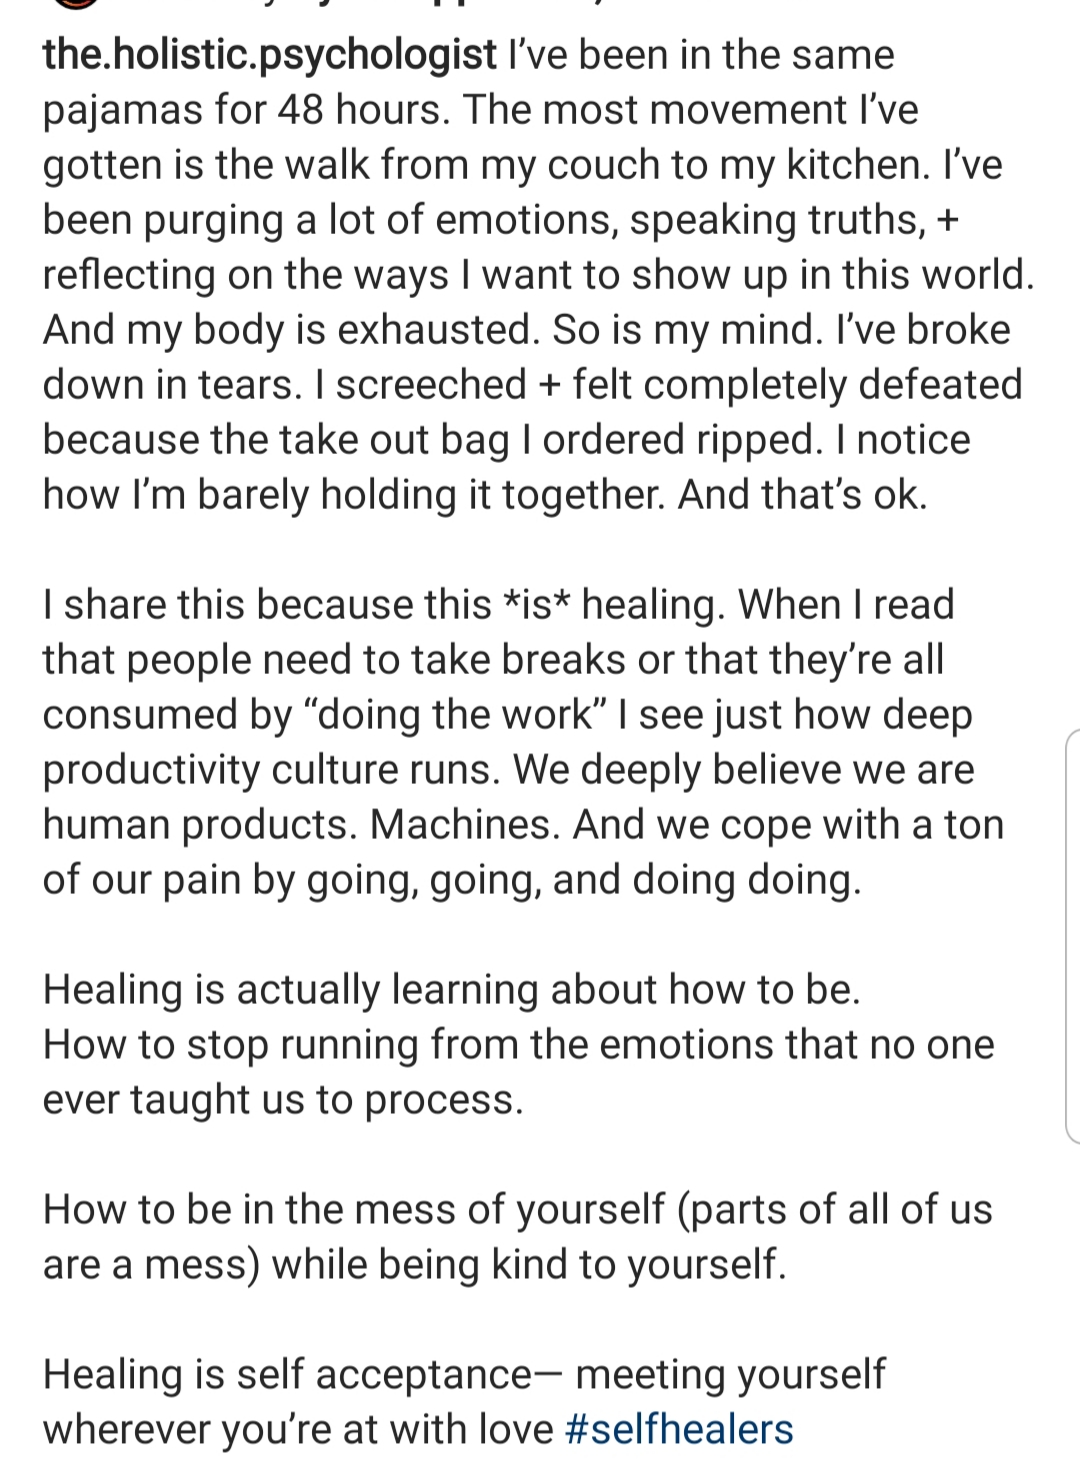 Healing is also learning how to be